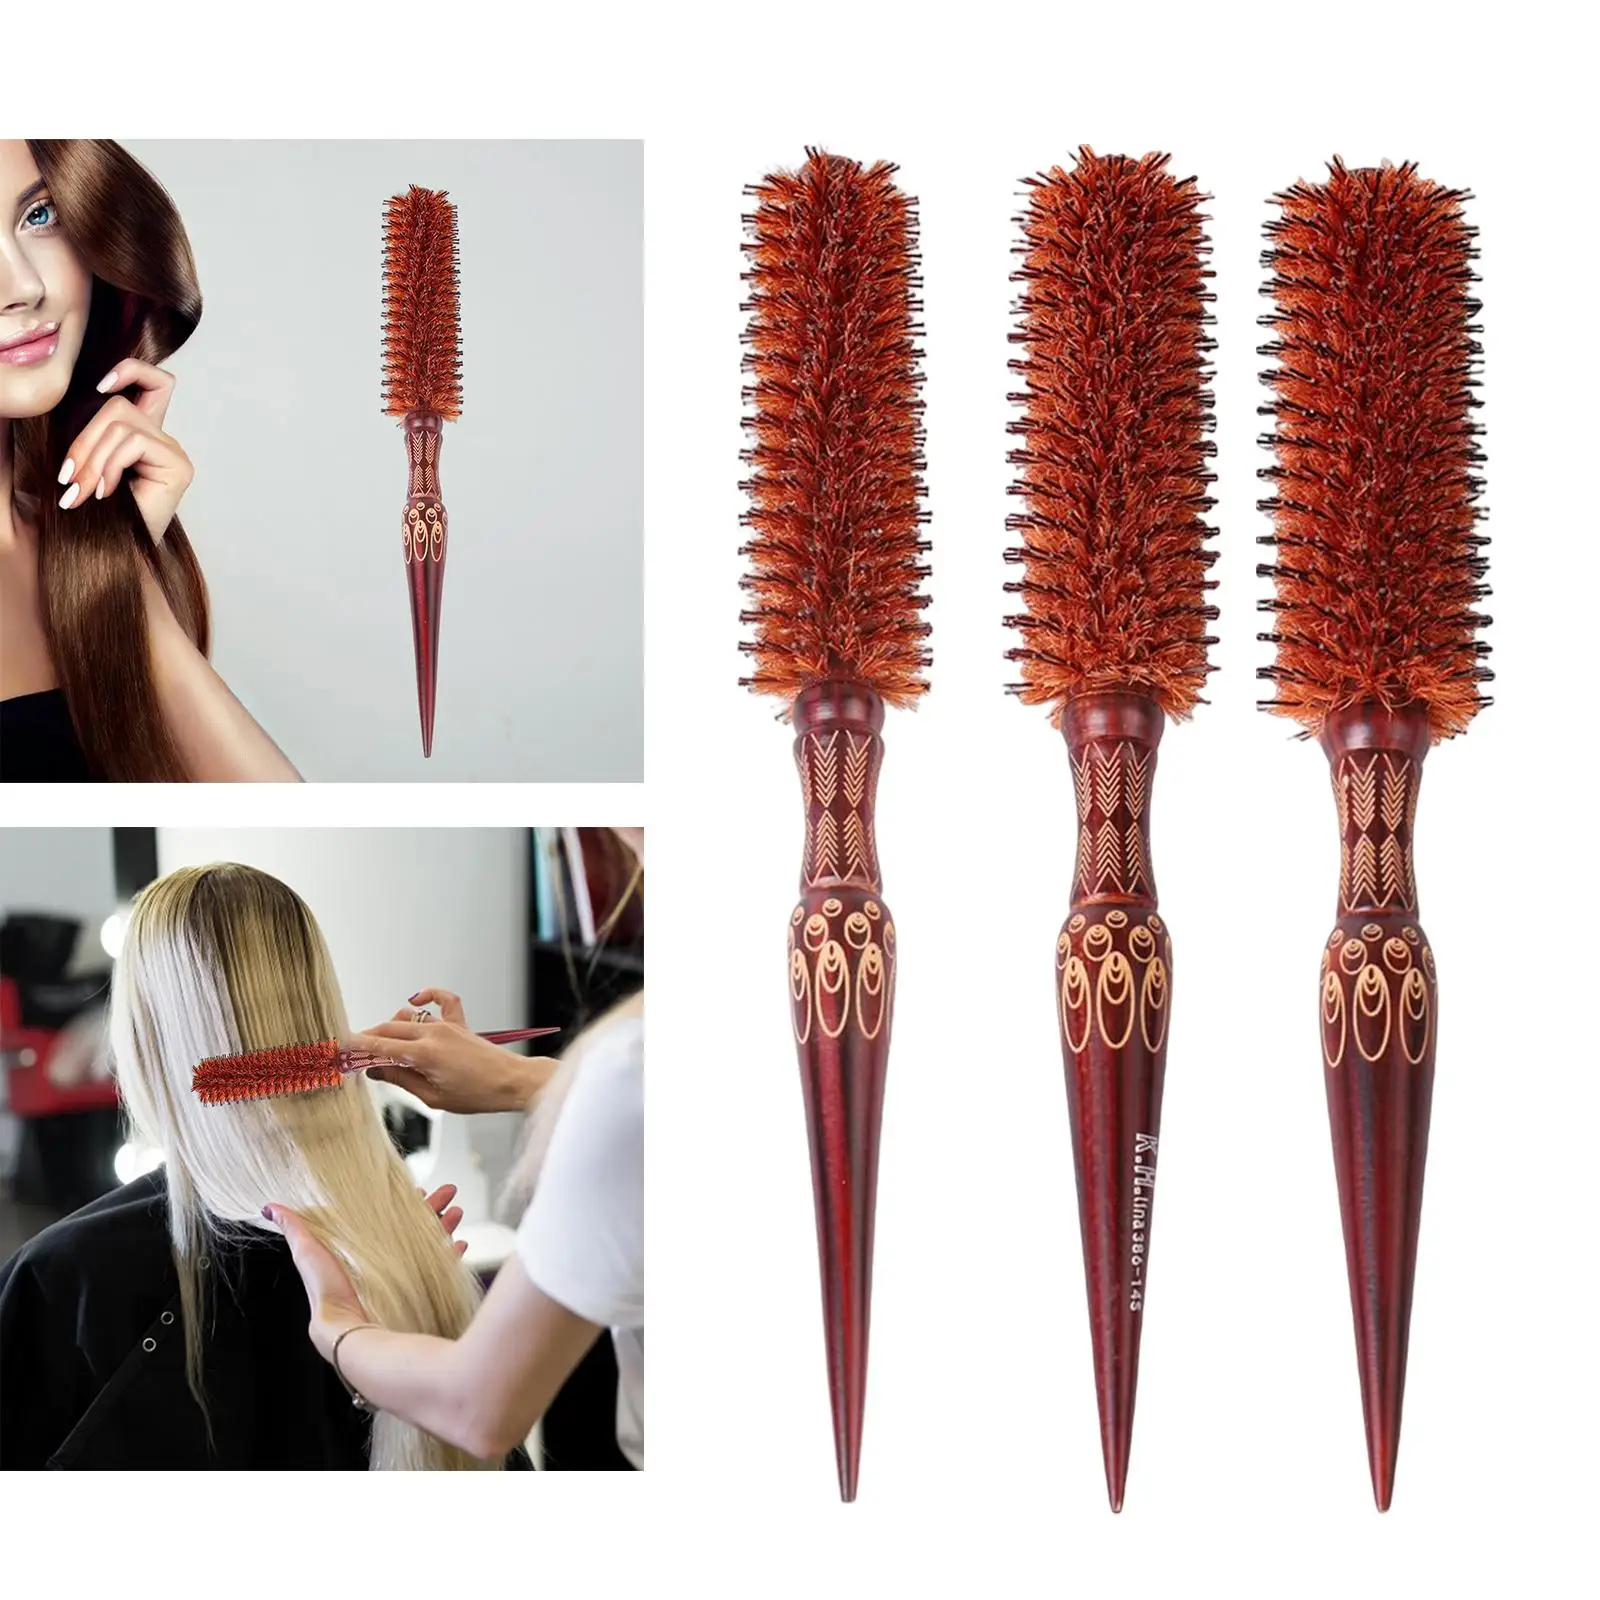 Round Hair Brush Wood Handle Light Weight Styling Tools Hairbrush for Heat Styling Blow Drying Barber Salon Long Hair